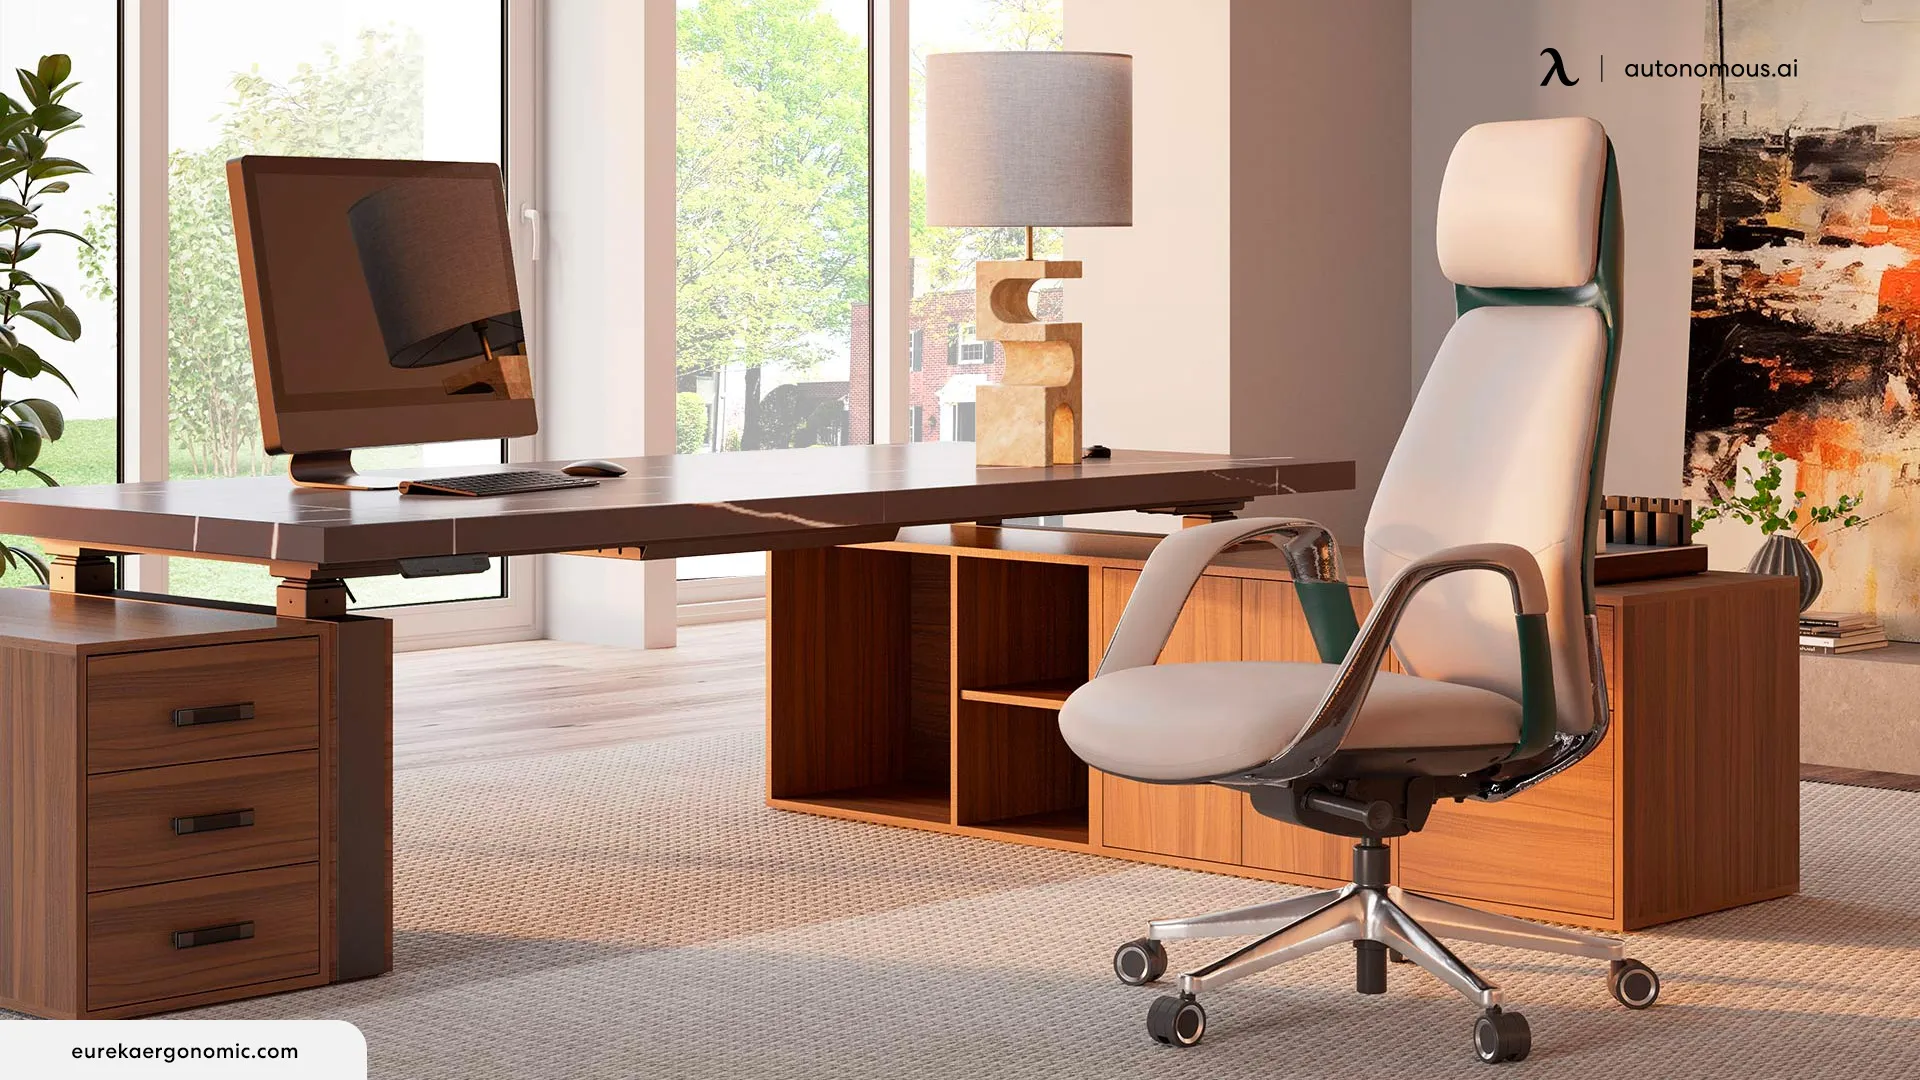 What Defines a Luxury Office Chair? Four Must-Have Features